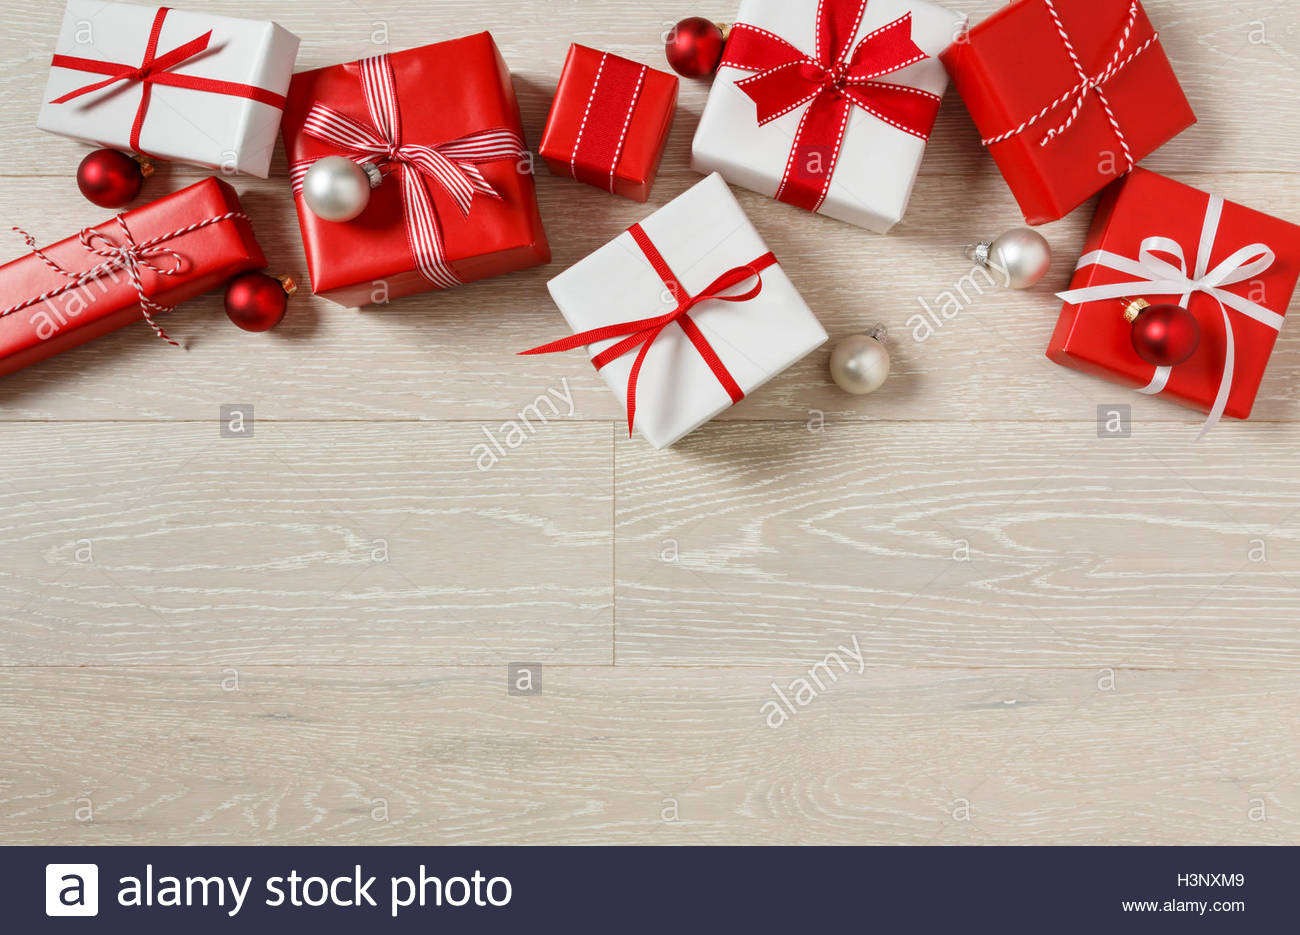 Christmas Gifts Presents On Rustic Wood Background Red And White